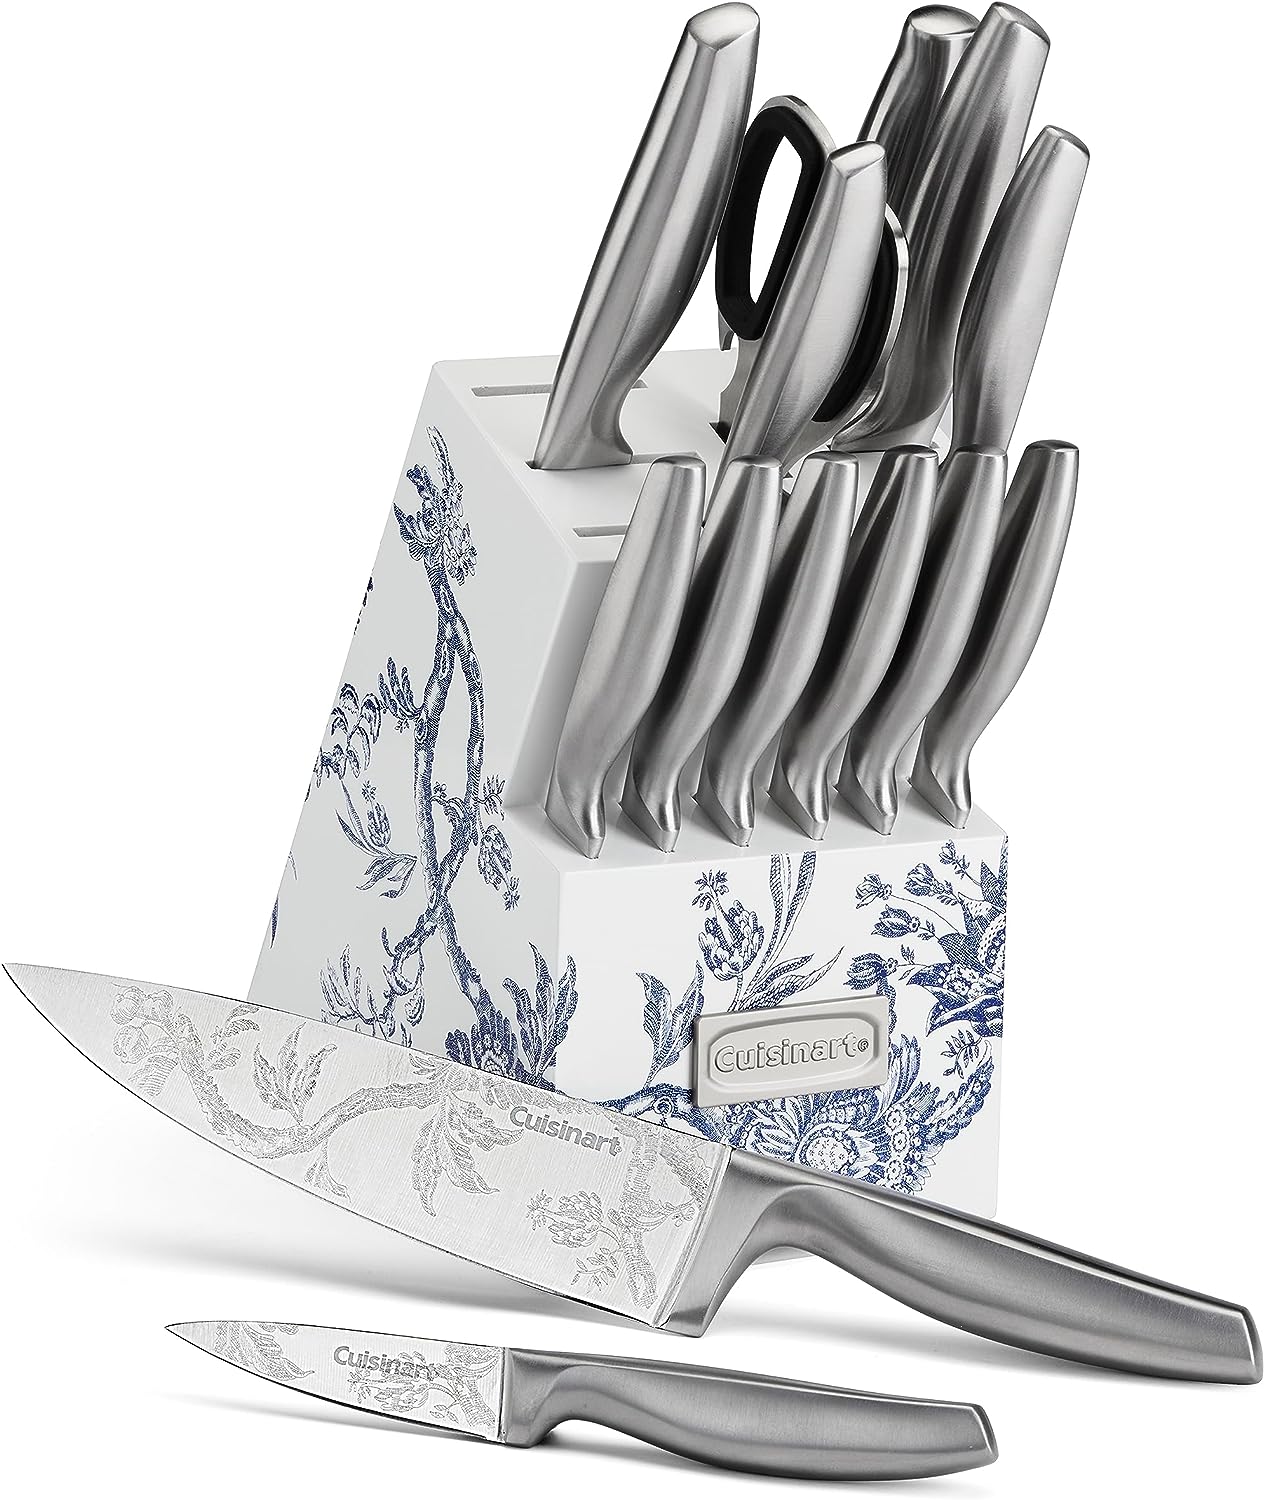 Review for Cuisinart 15 piece knife set 